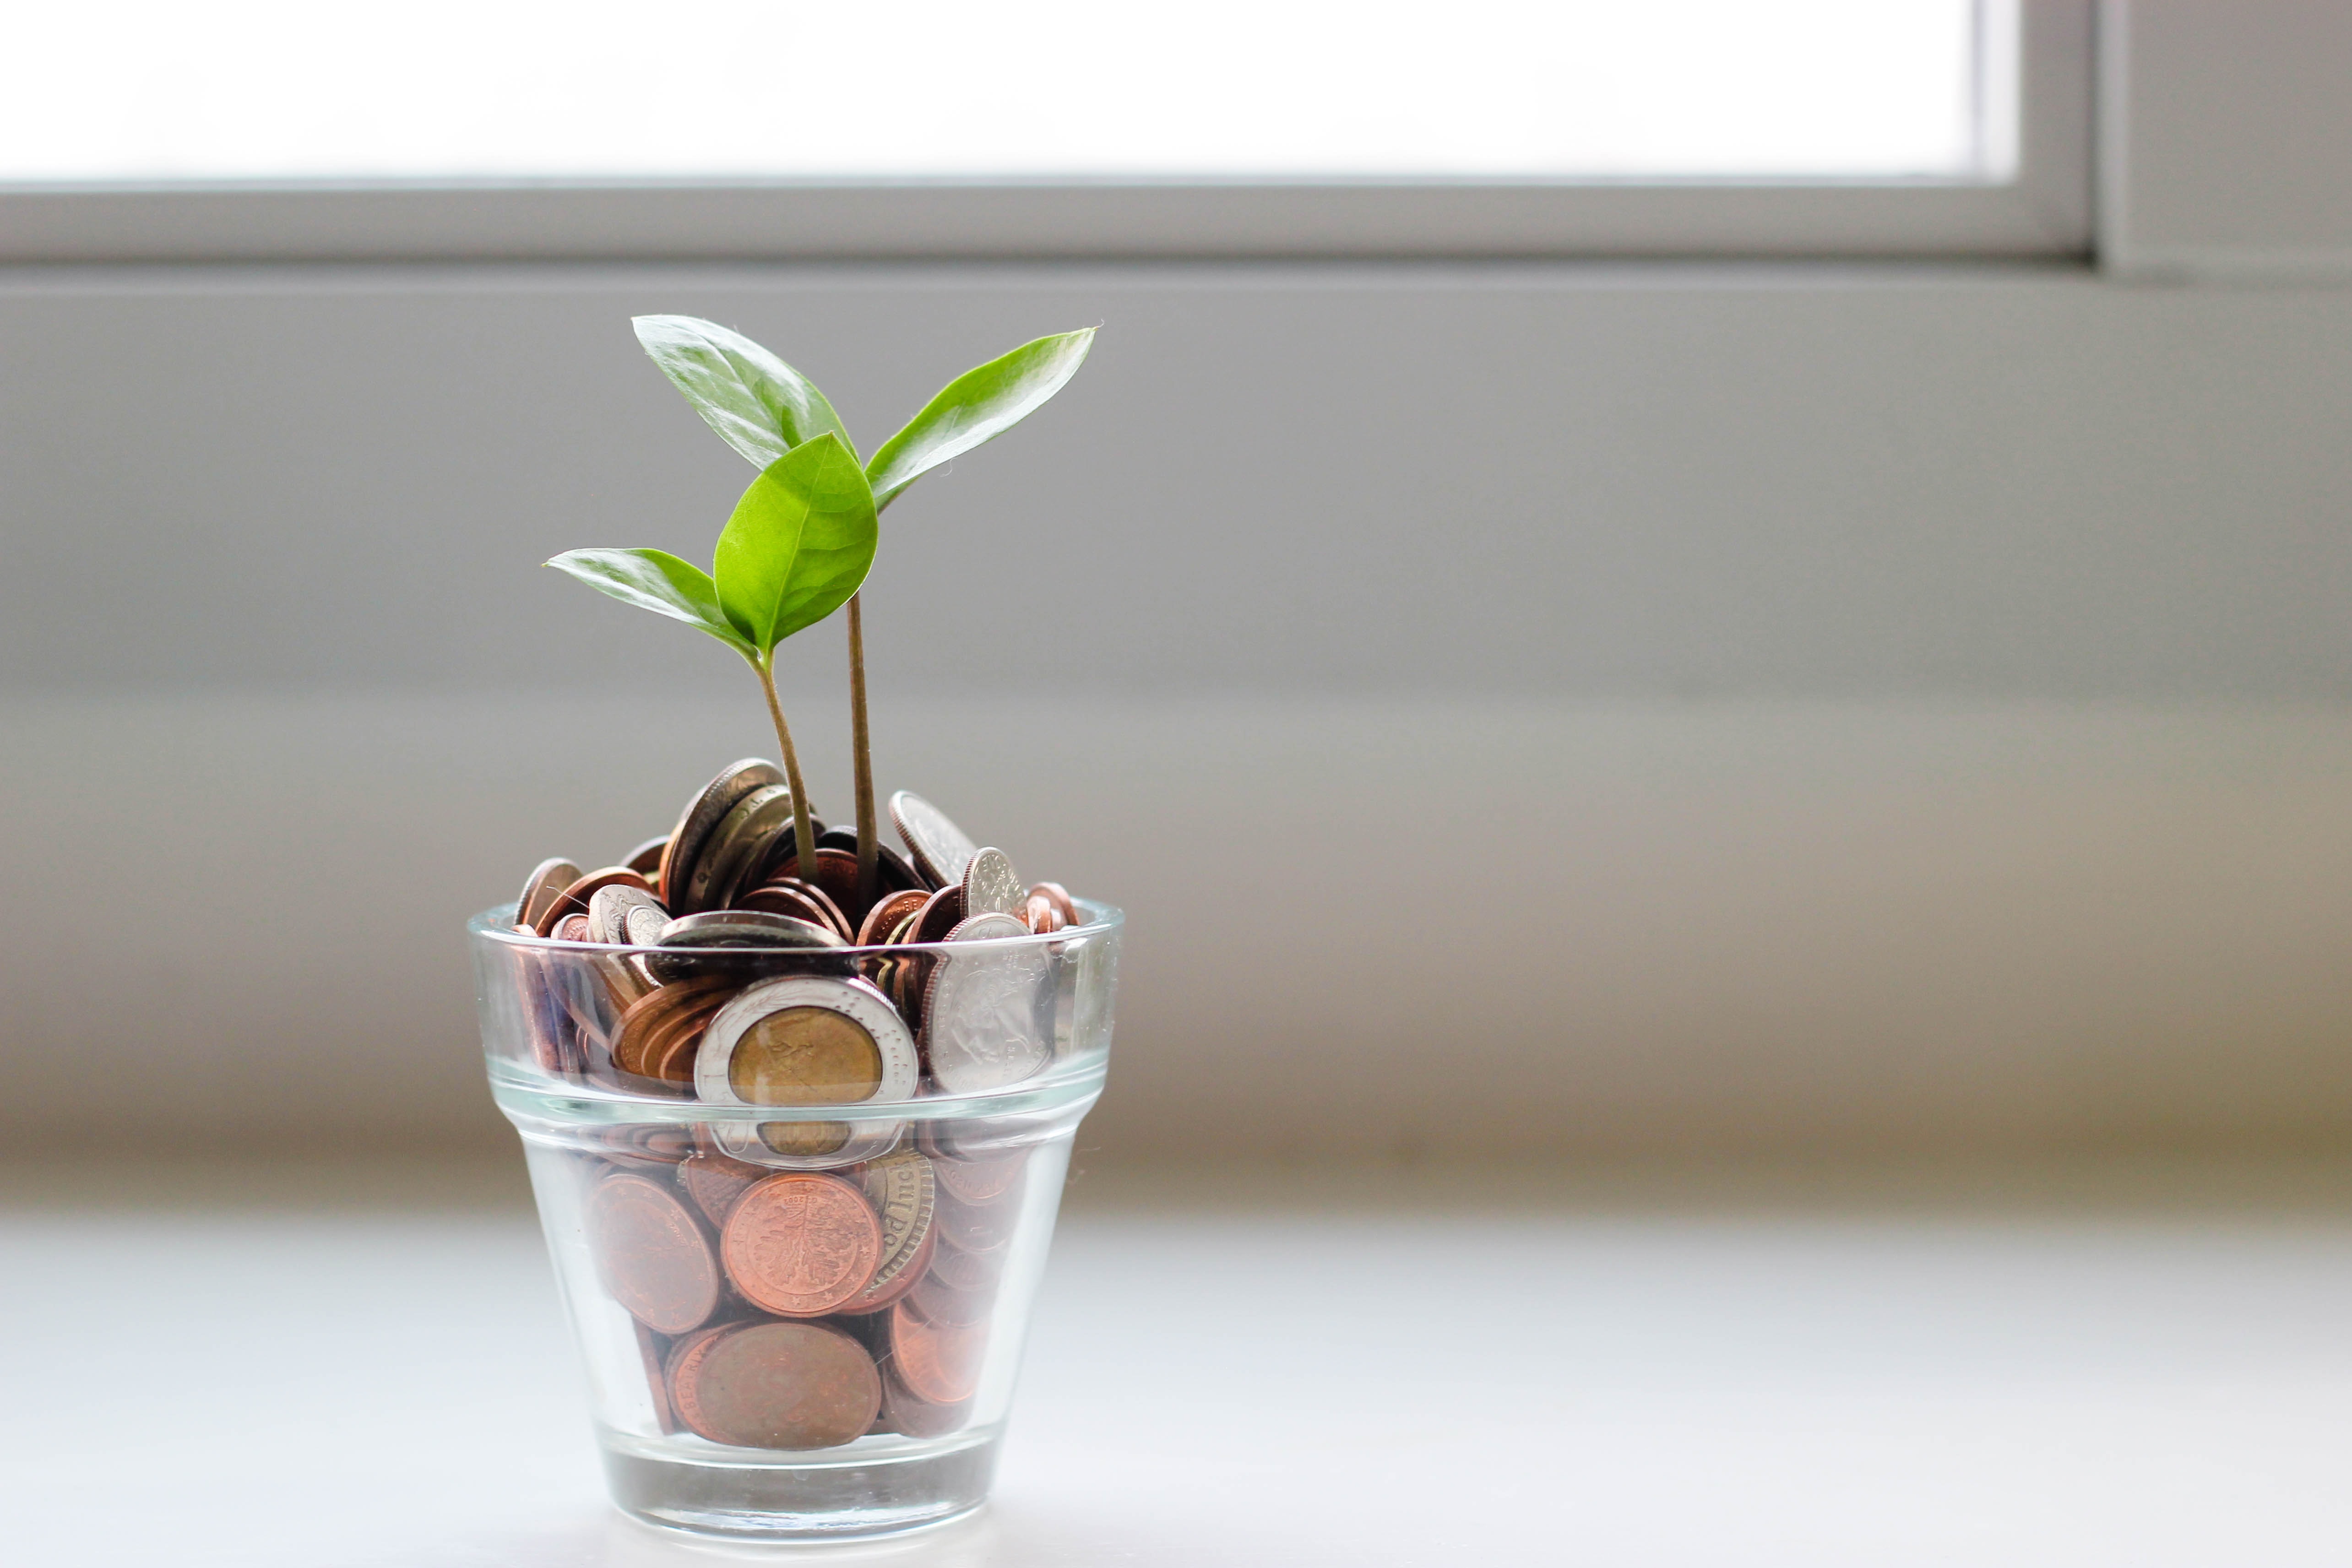 A small glass with coins in it, a plant emerging from the coins.